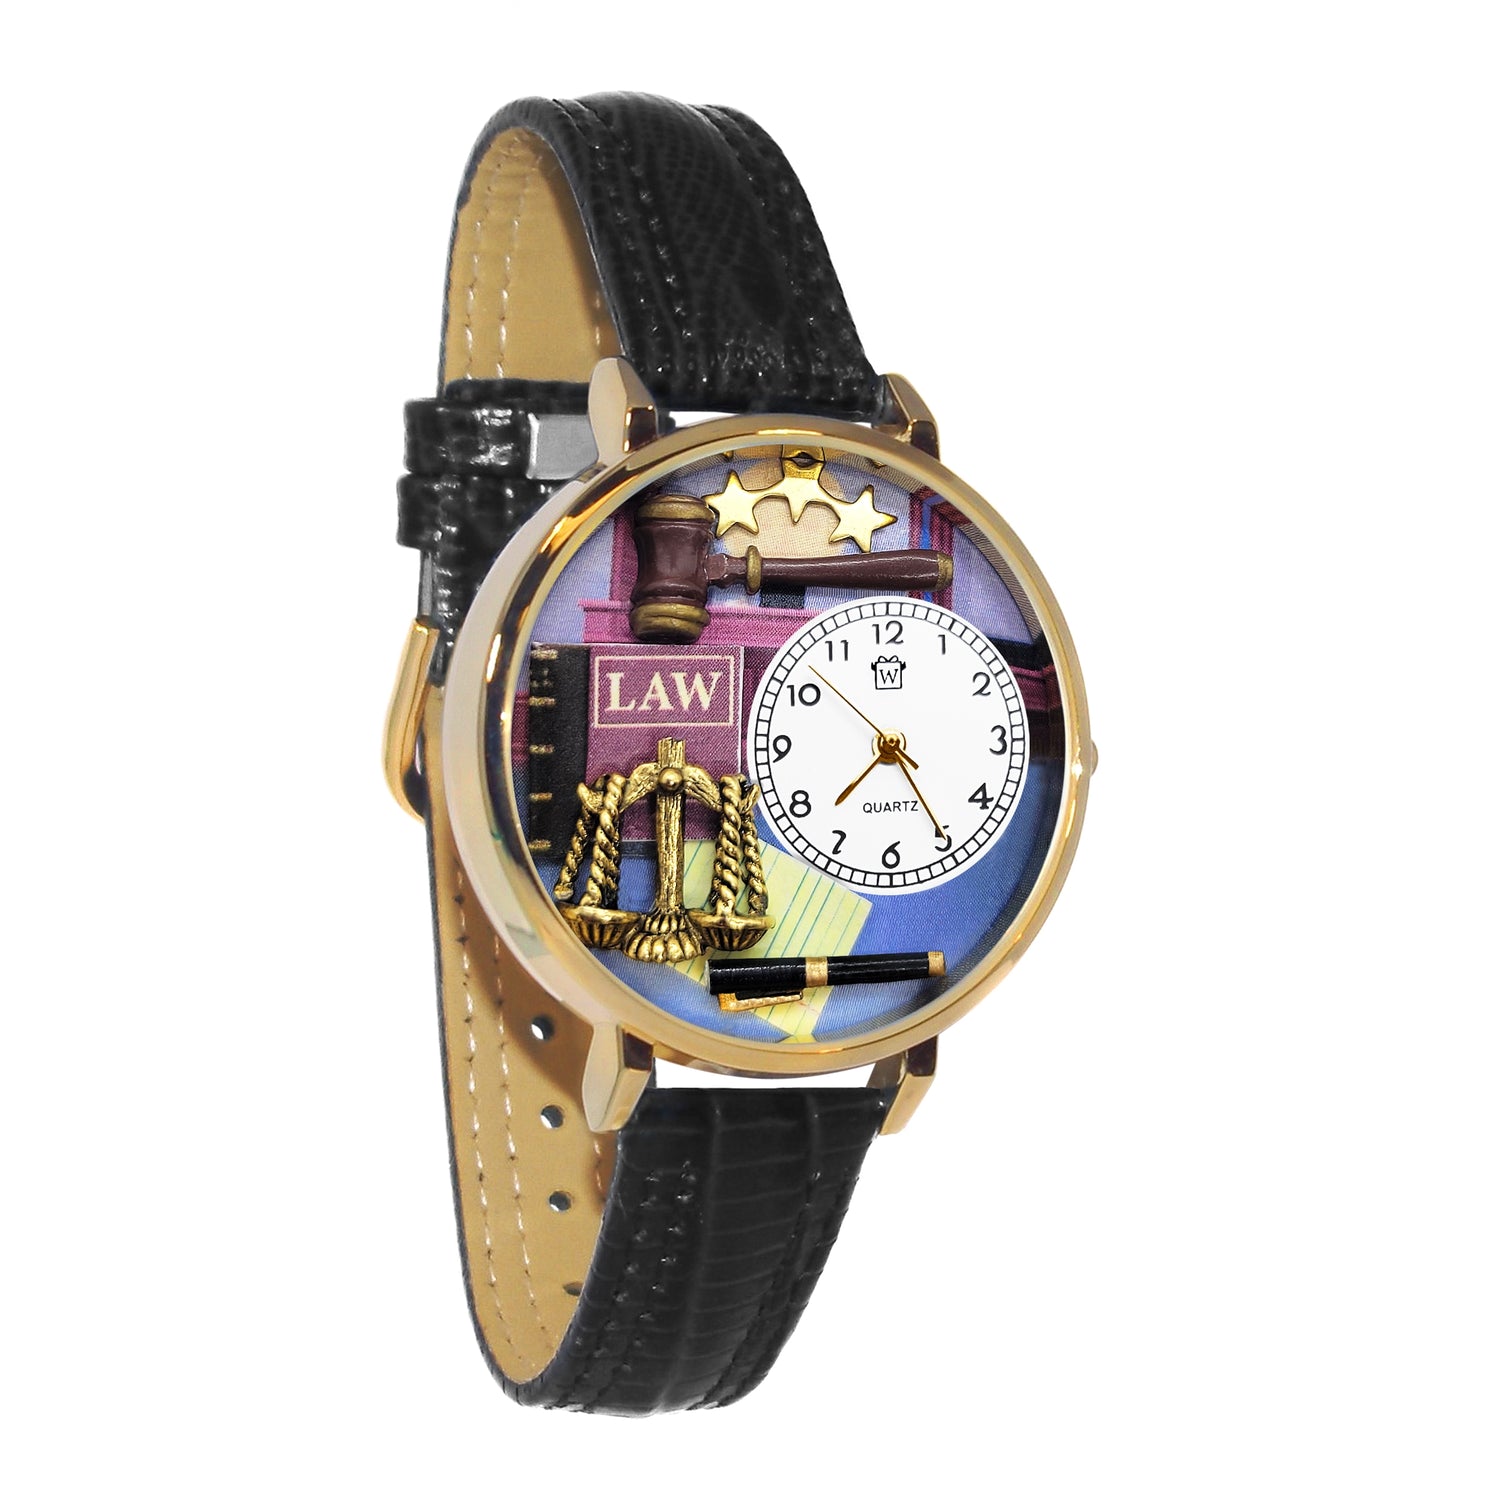 Whimsical Gifts | Lawyer 3D Watch Large Style | Handmade in USA | Professions Themed | Business & Legal | Novelty Unique Fun Miniatures Gift | Gold Finish Black Leather Watch Band